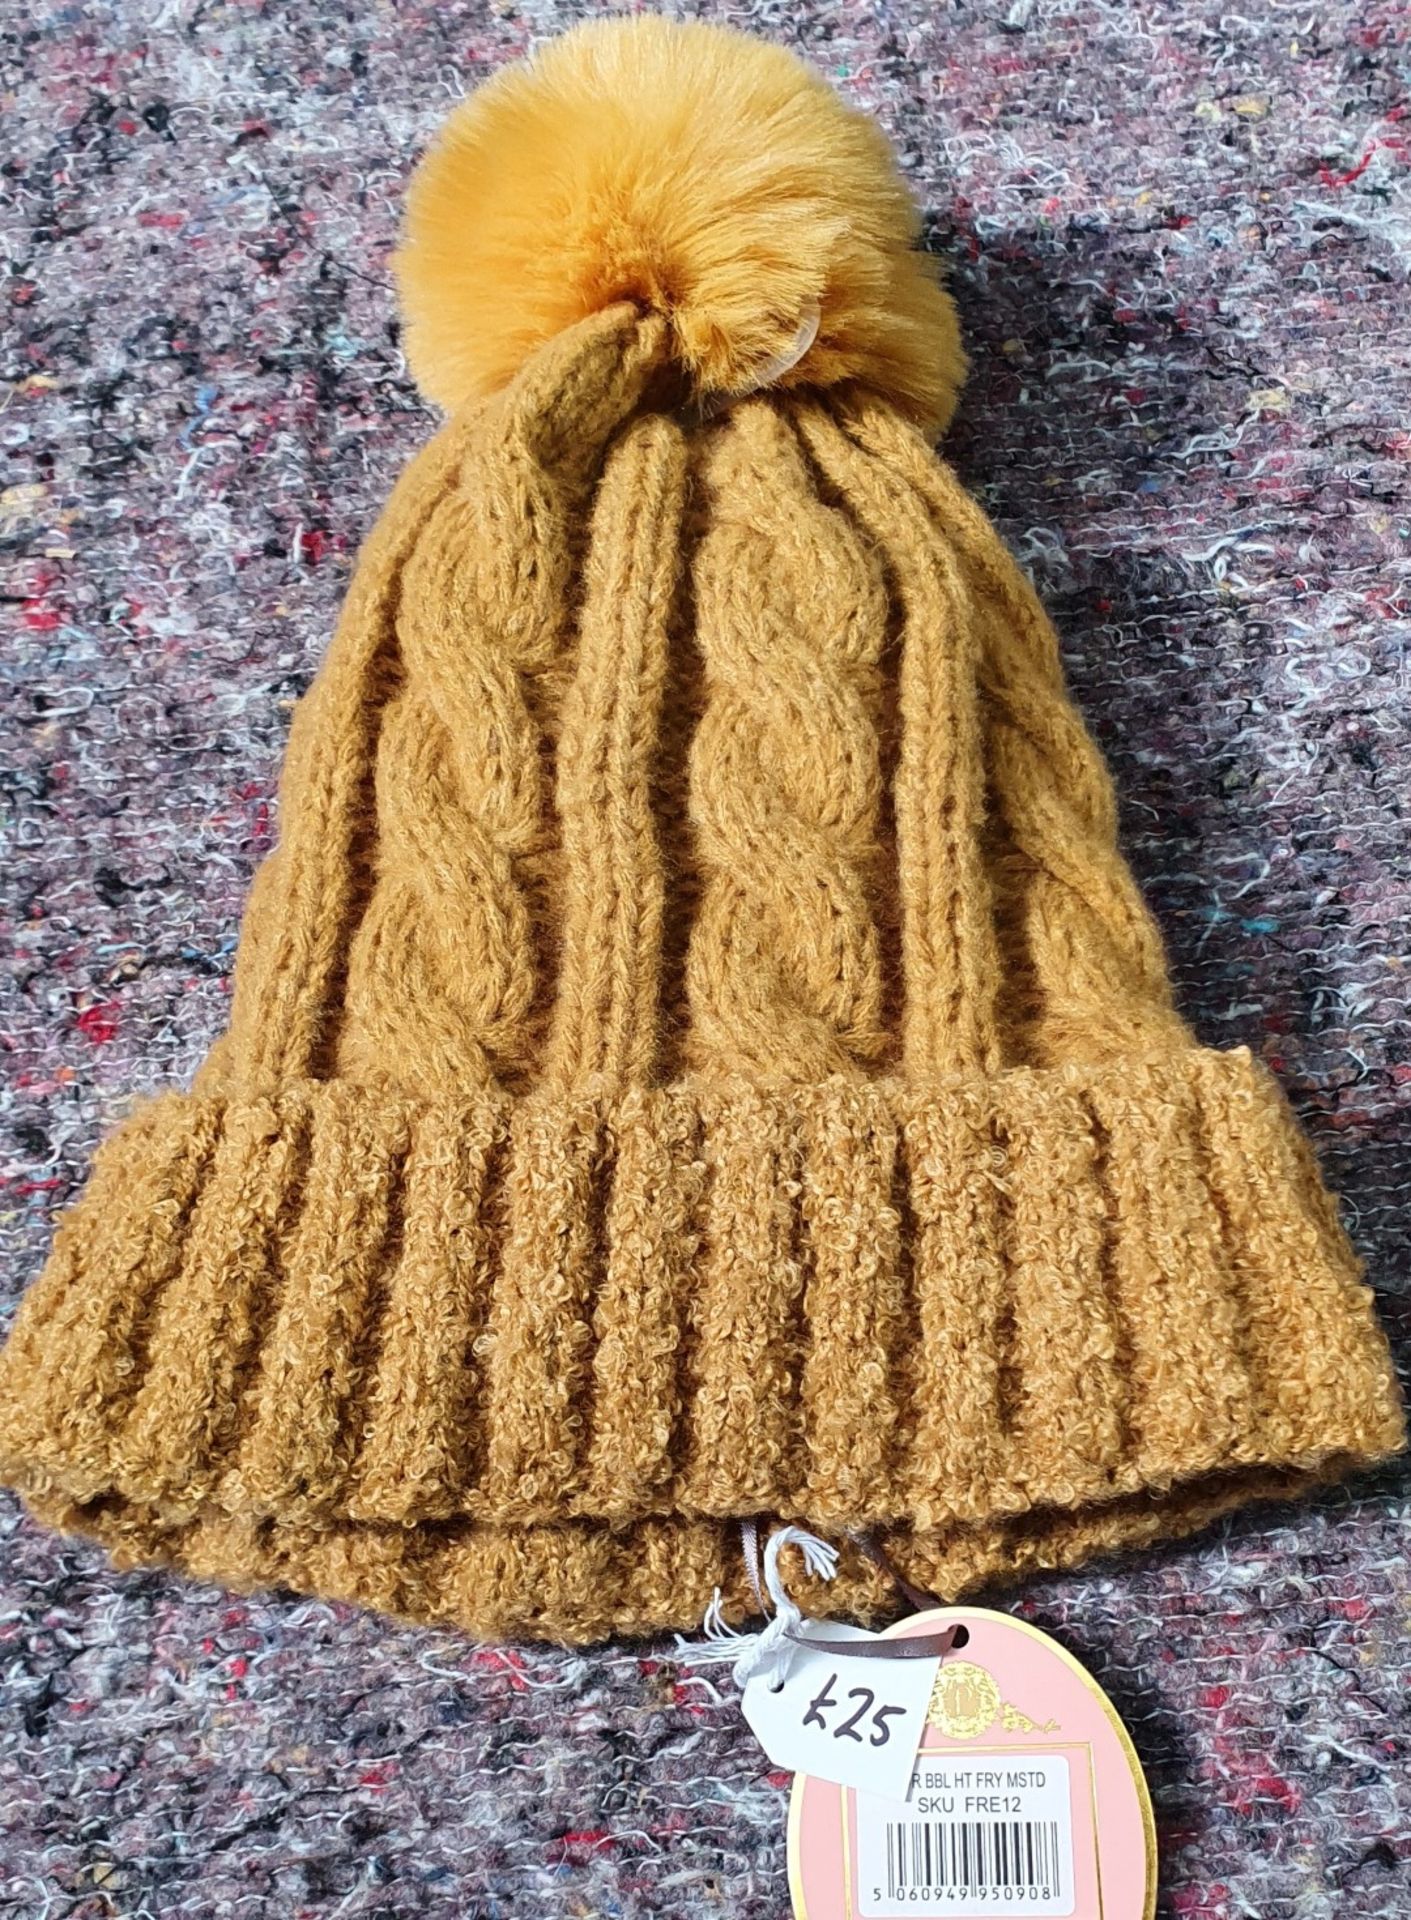 7 x Powder Adults Woolly Bobble Hats - New Stock - RRP Between £25-30 Each- Ref: TCH241 - CL840 - - Image 8 of 10